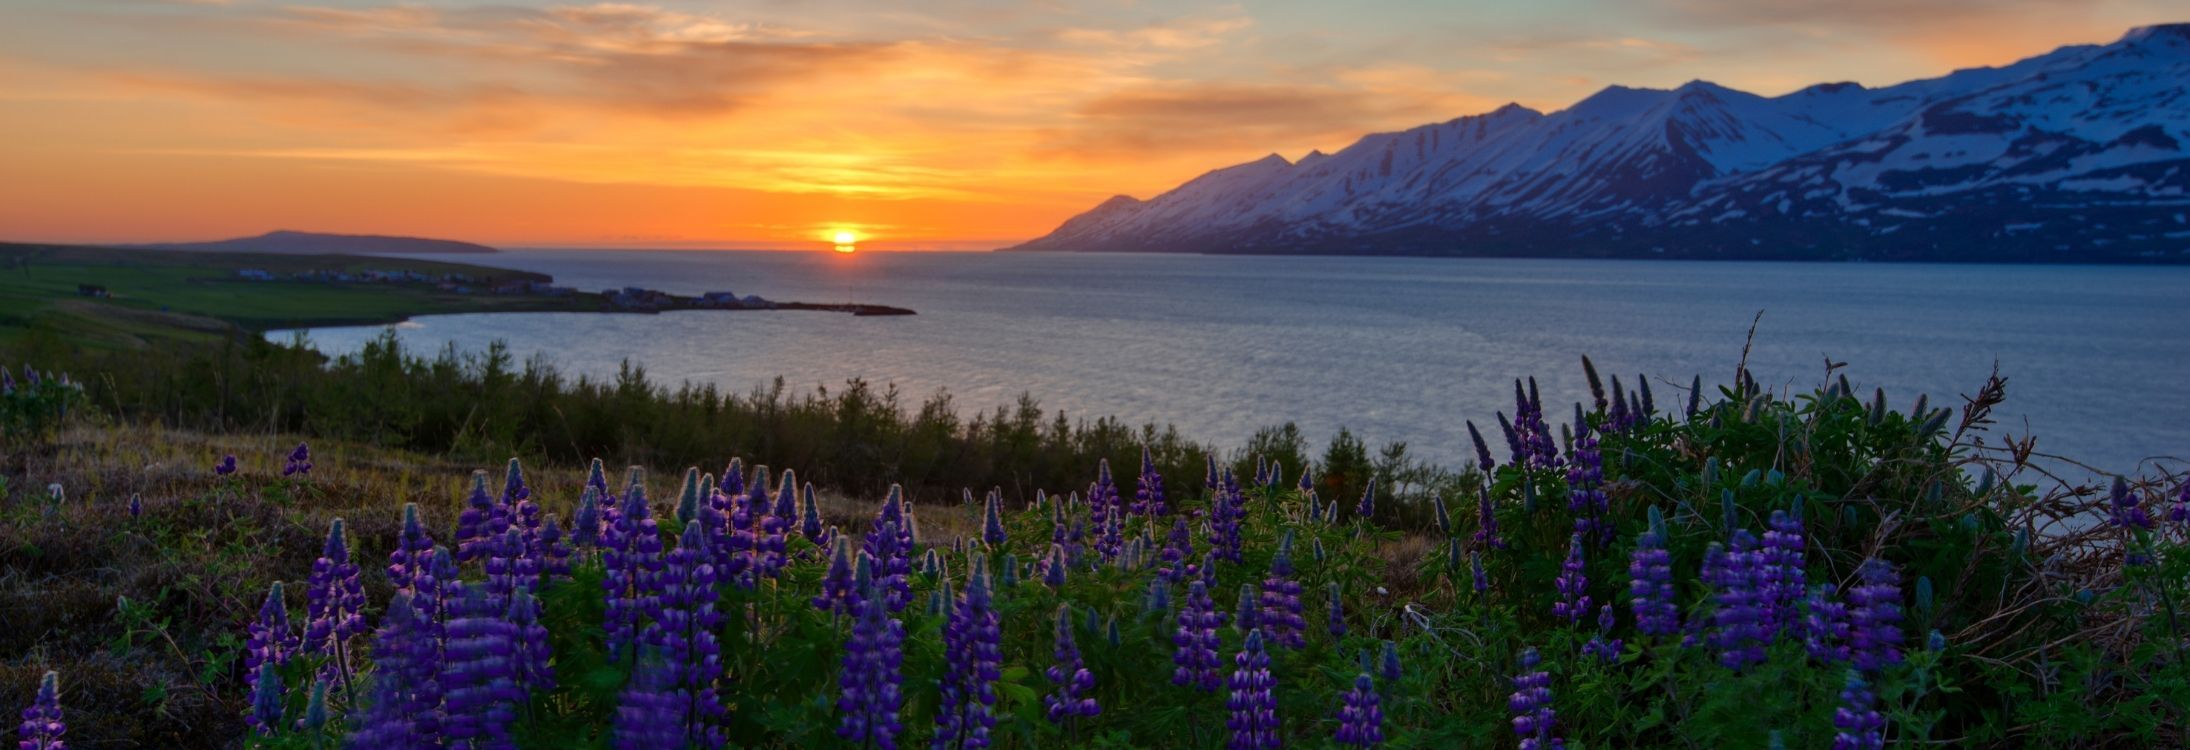 5 Places Where You Can Experience the Midnight Sun